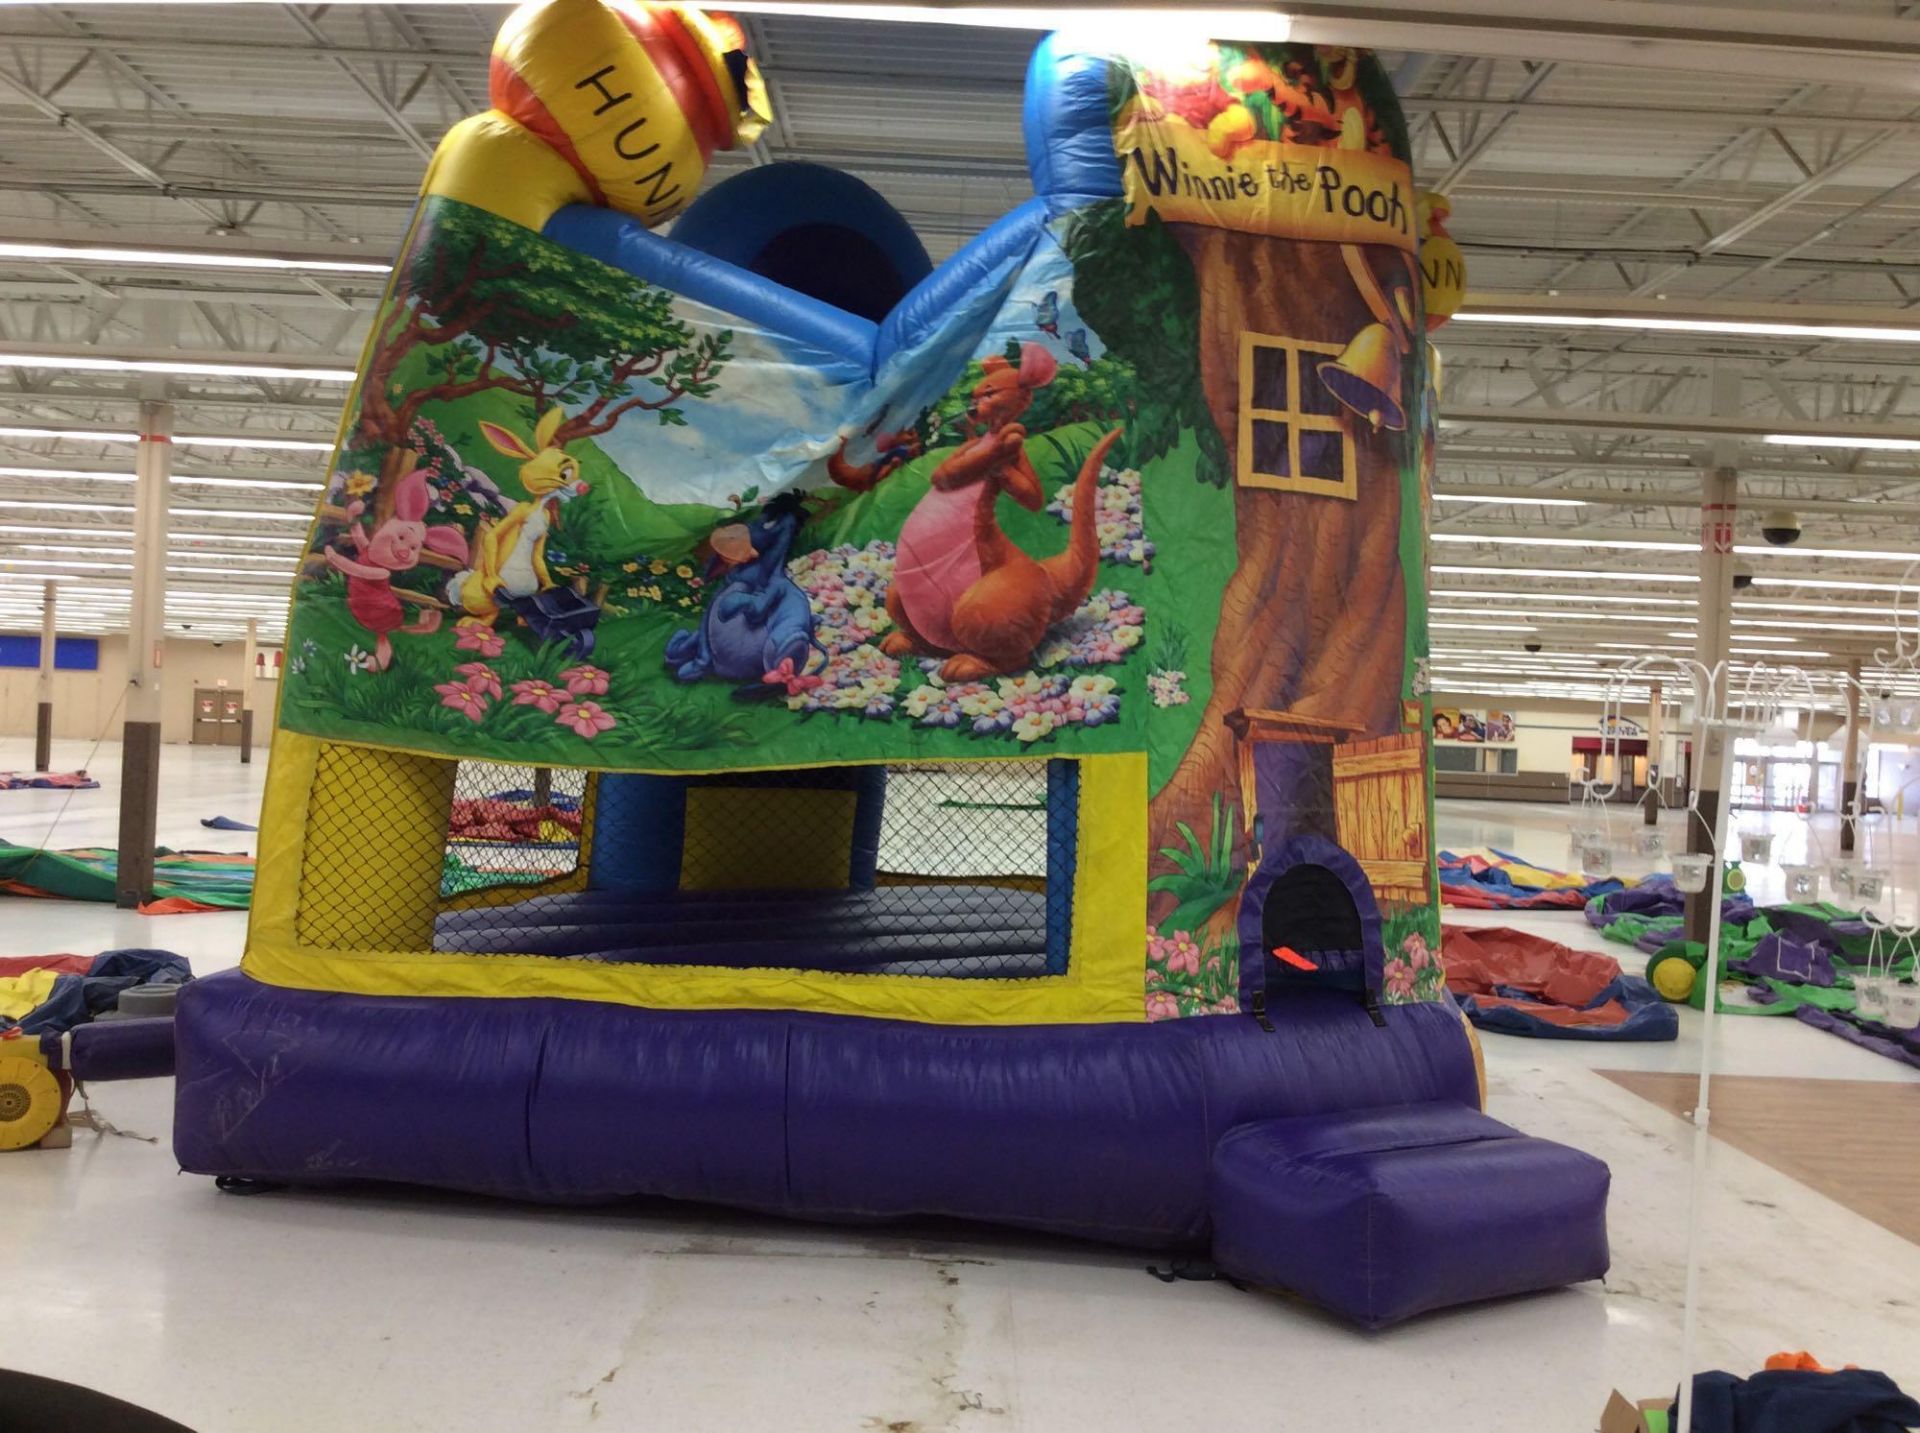 15' x 15' inflatable "Winnie the Pooh" bounce house, with blower.